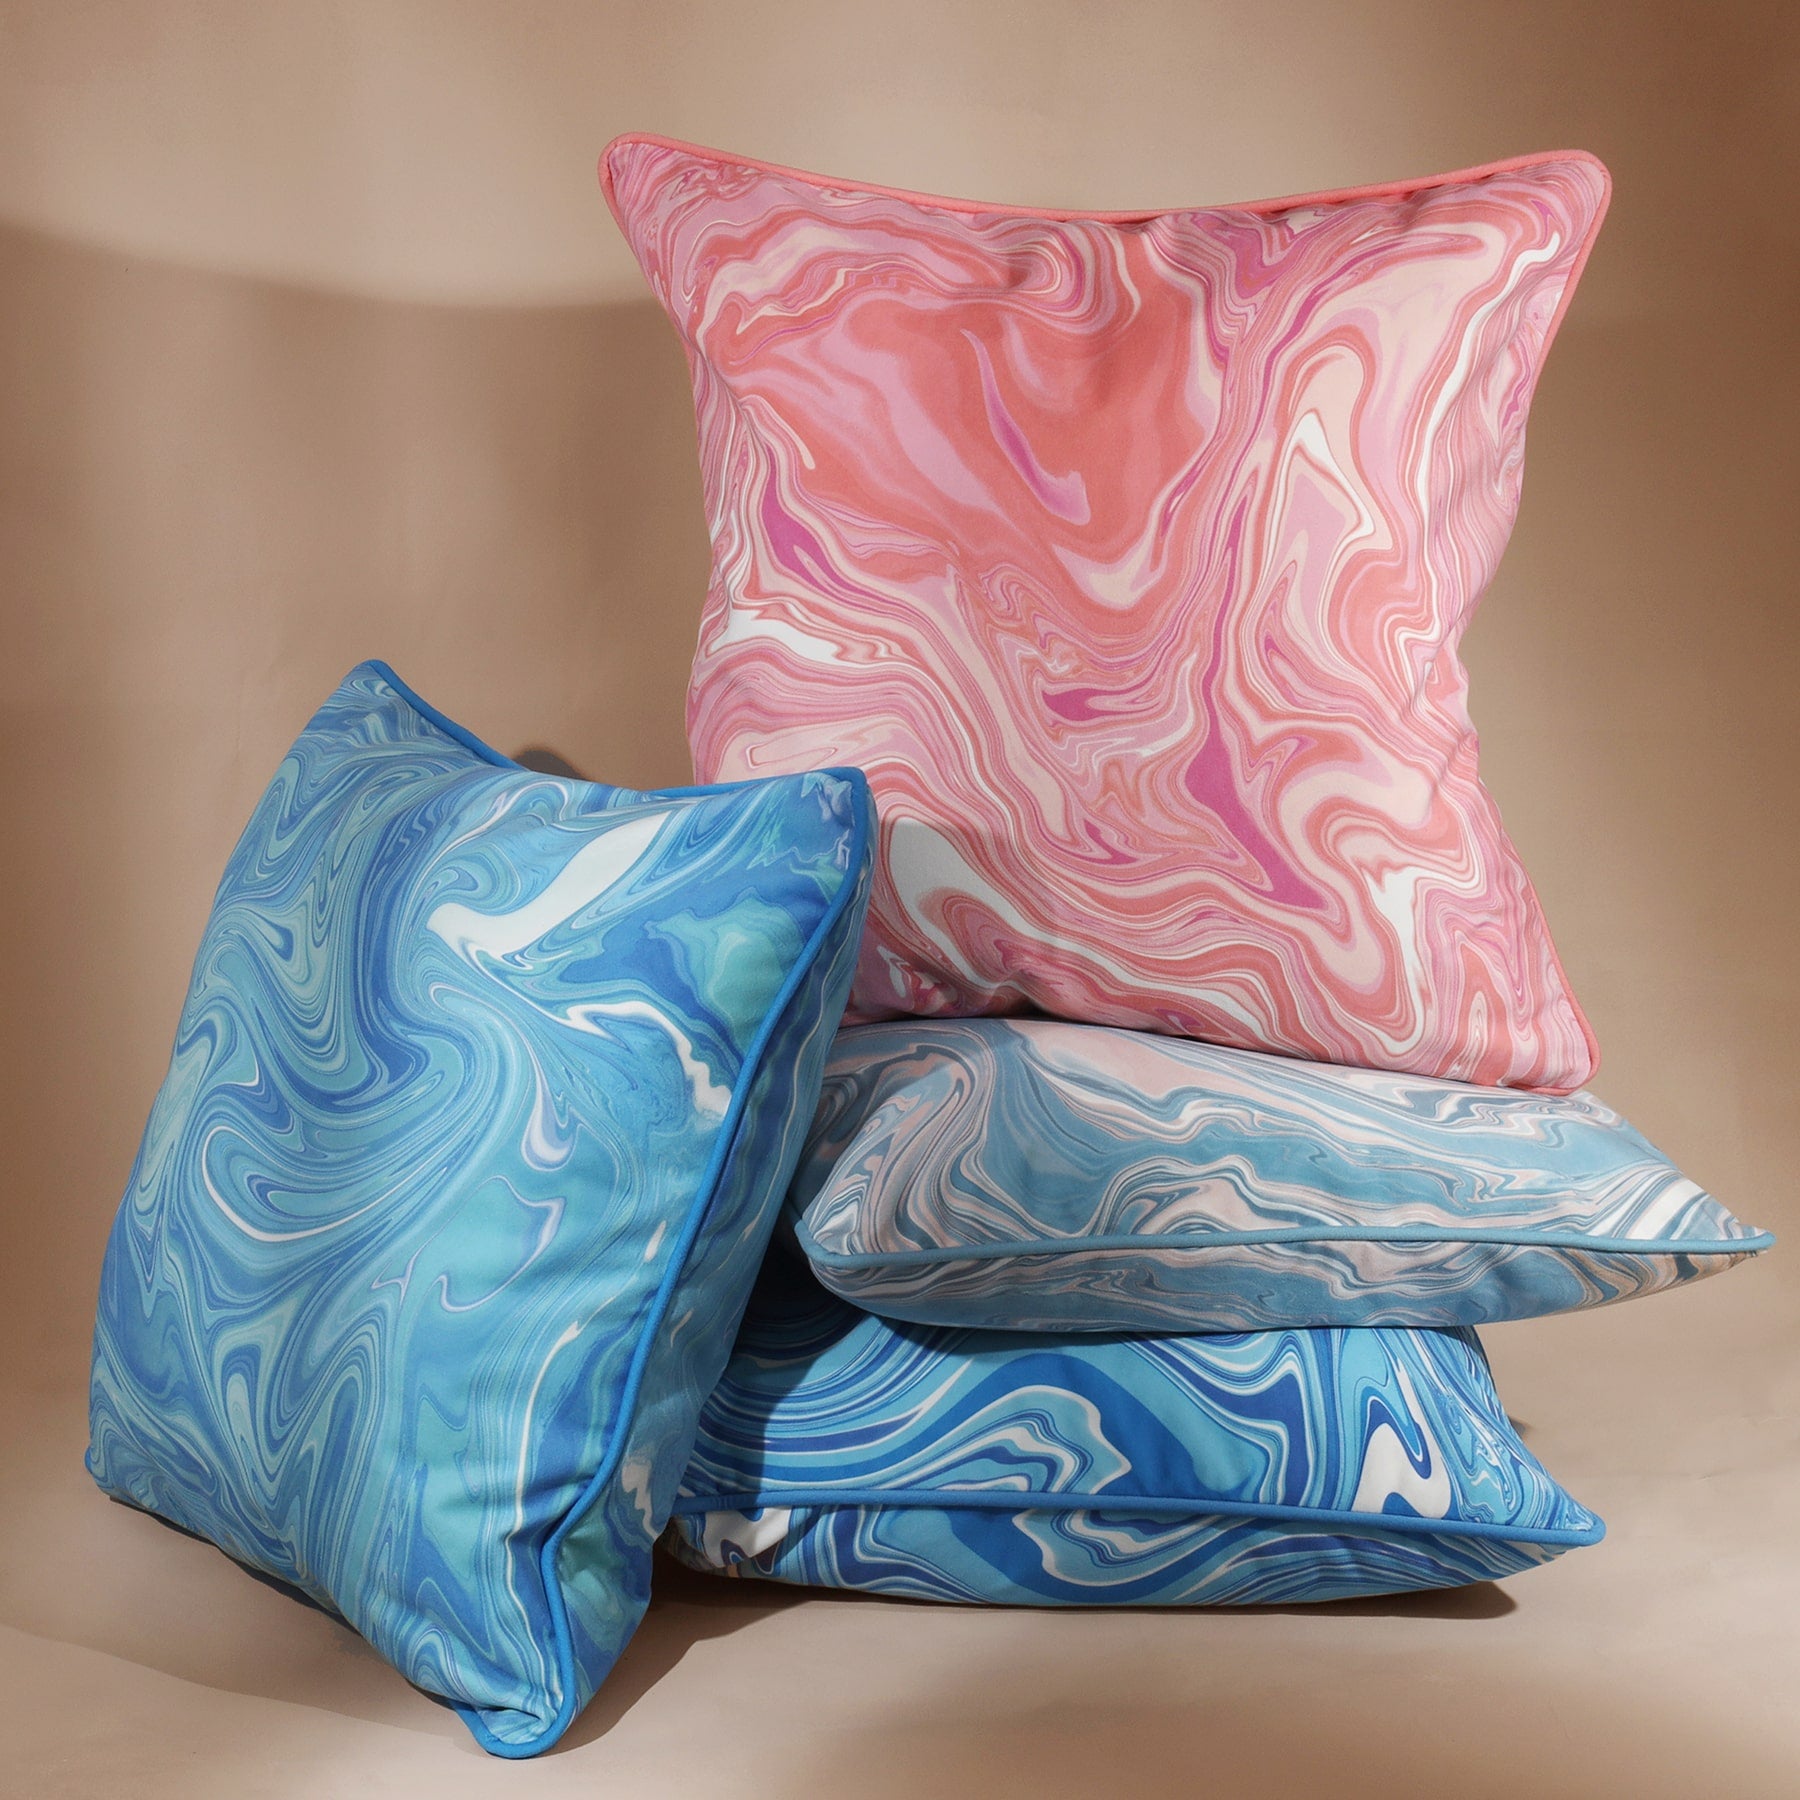 Marble,swirl cushion in Sundowner colours in pinks/whites and coral placed on top of a pile of similar designs in blues. greys and a brighter blue